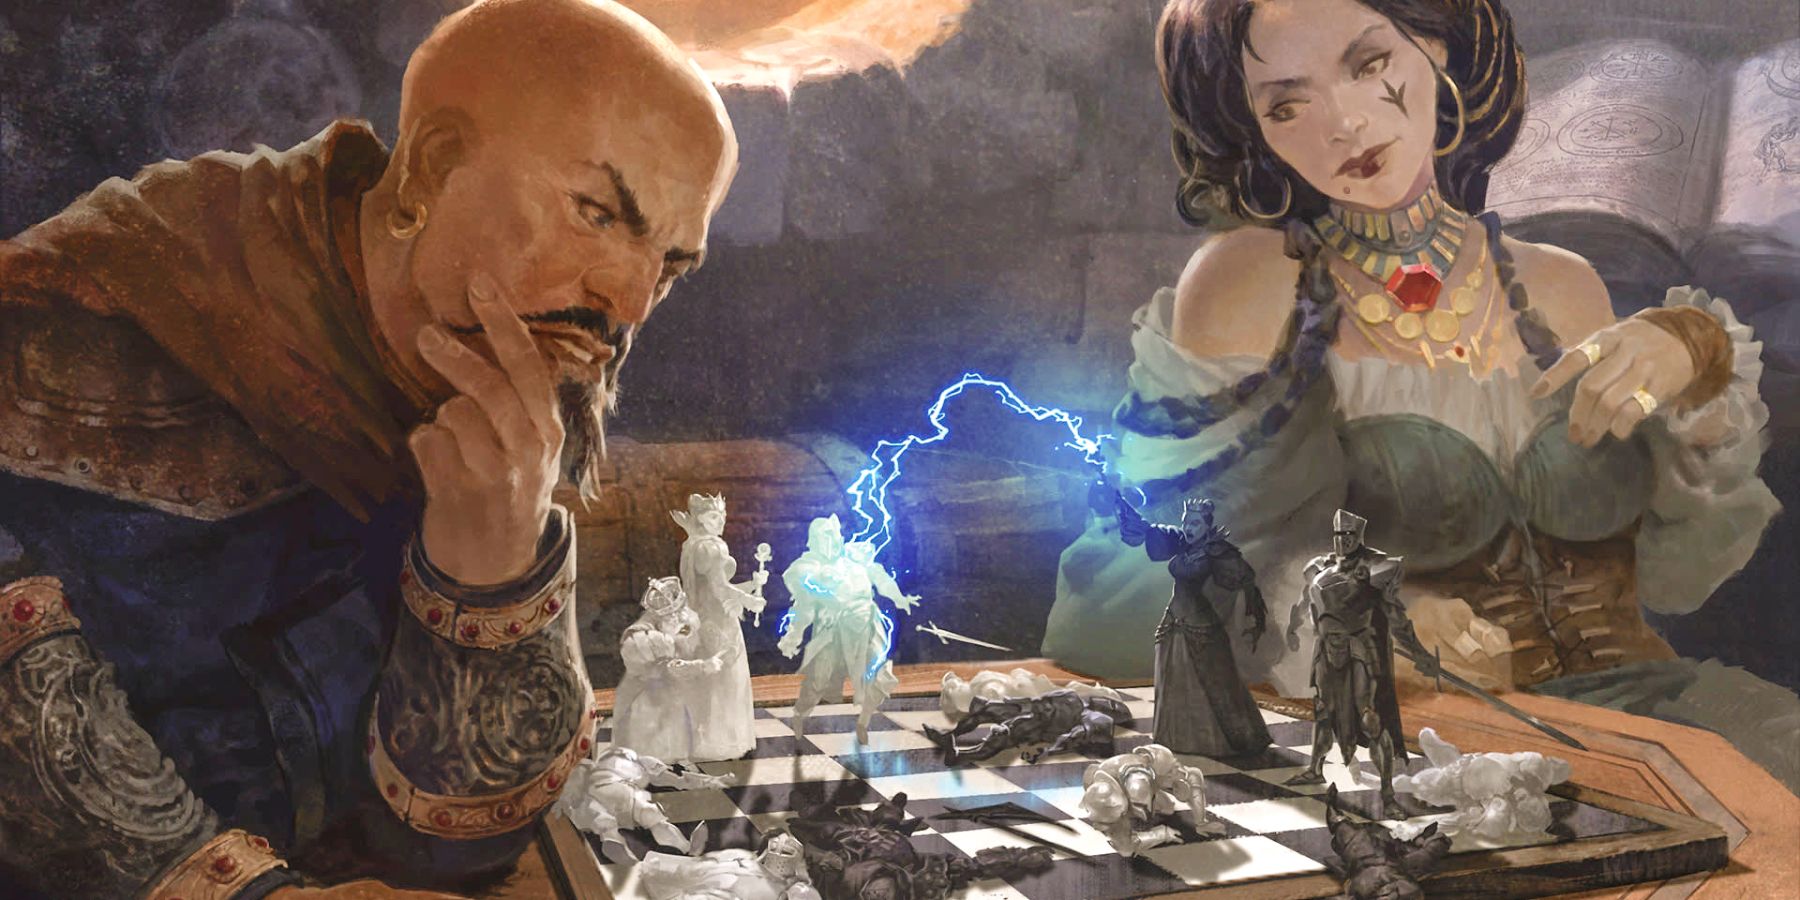 Dungeons & Dragons artwork of two characters playing a board game that resembles a magical version of chess, where one figure on the checkered board is striking another with a bolt of lightning.